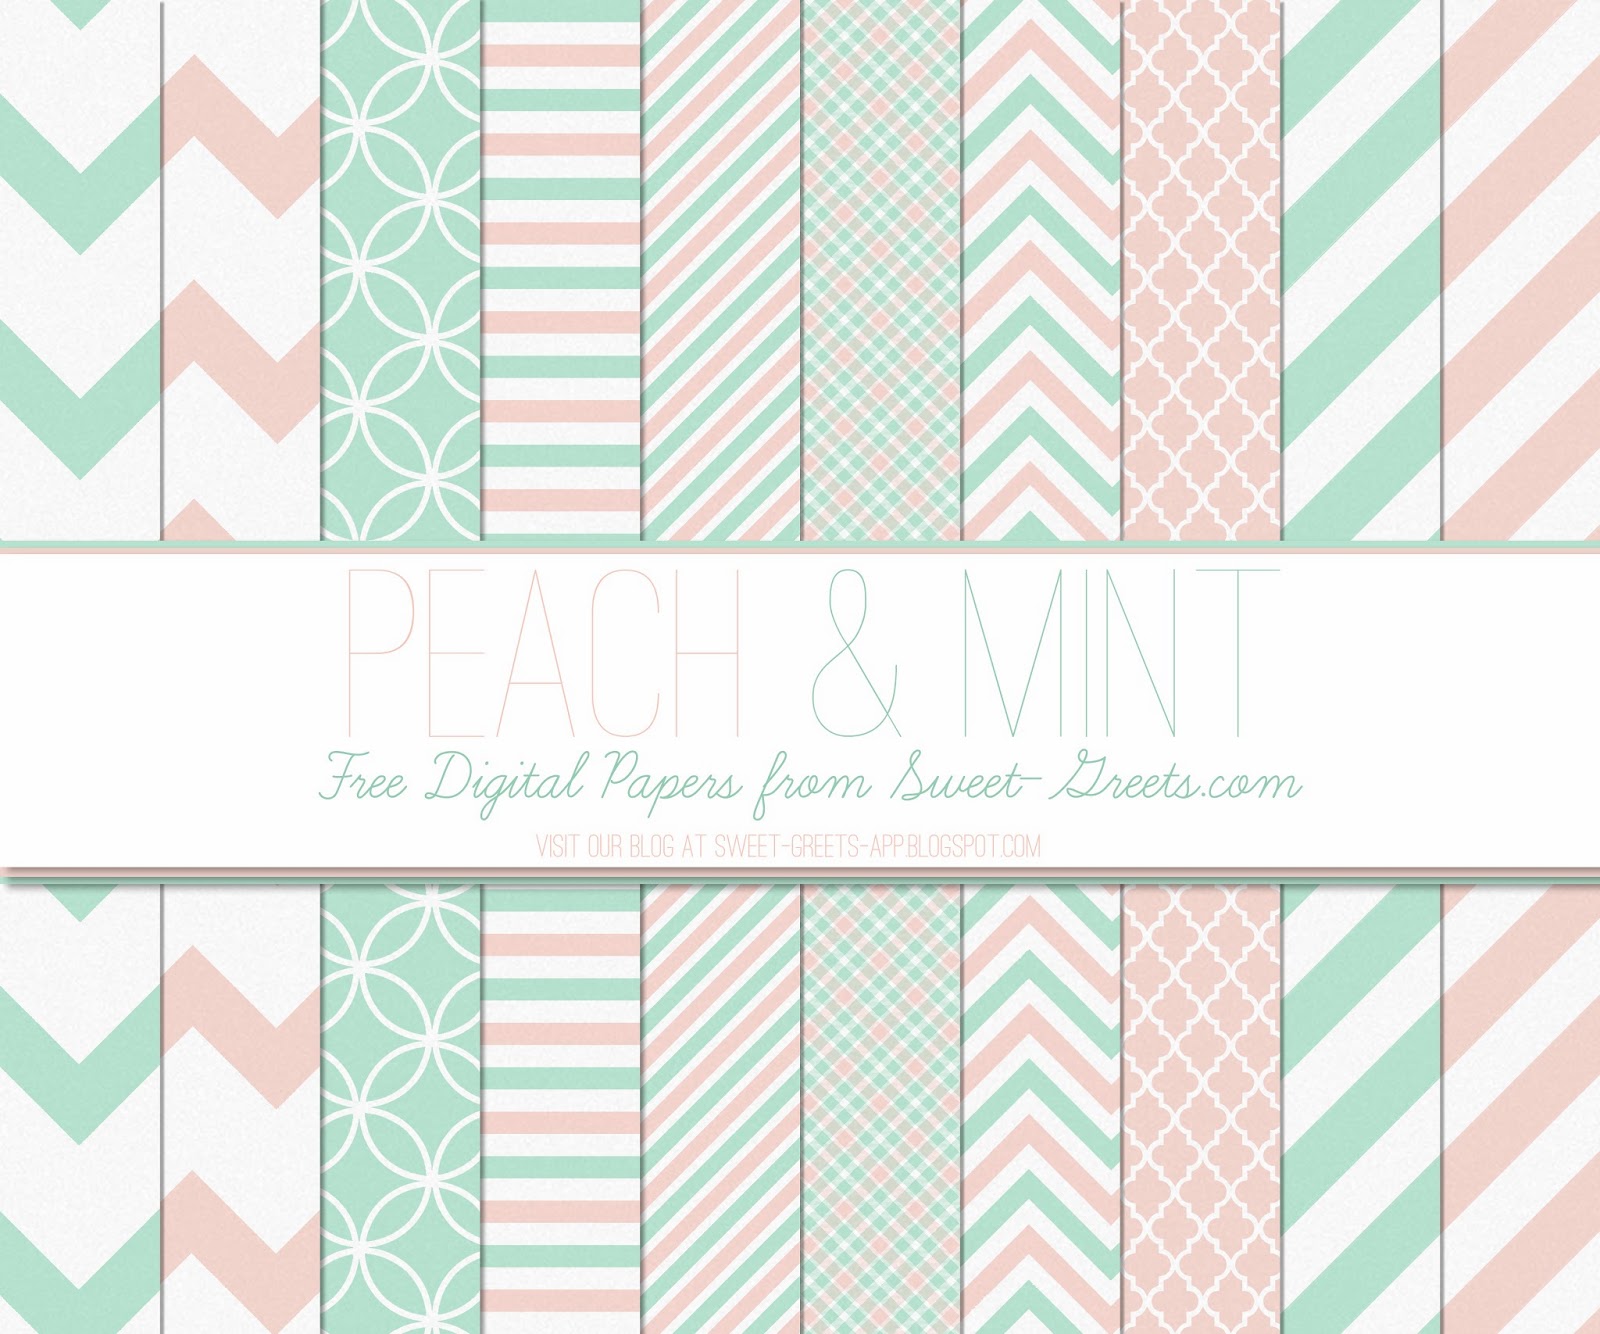 Croydon Pattern Papers Instant Download Printable Patterned Papers